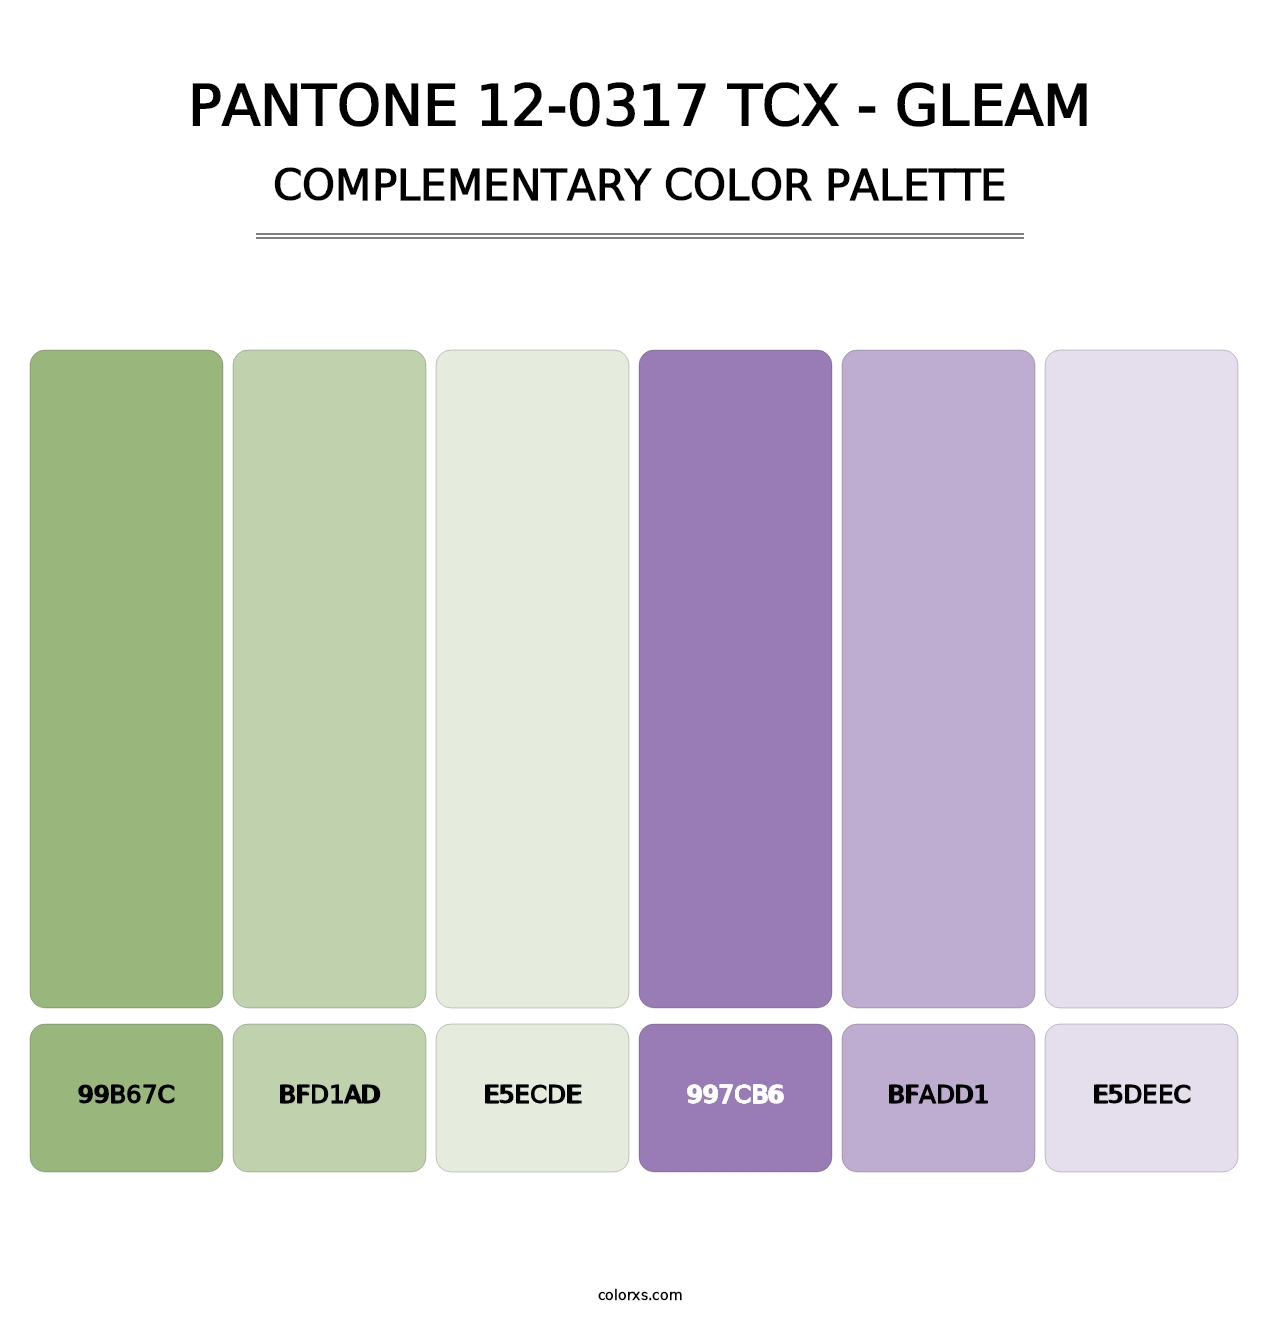 PANTONE 12-0317 TCX - Gleam - Complementary Color Palette